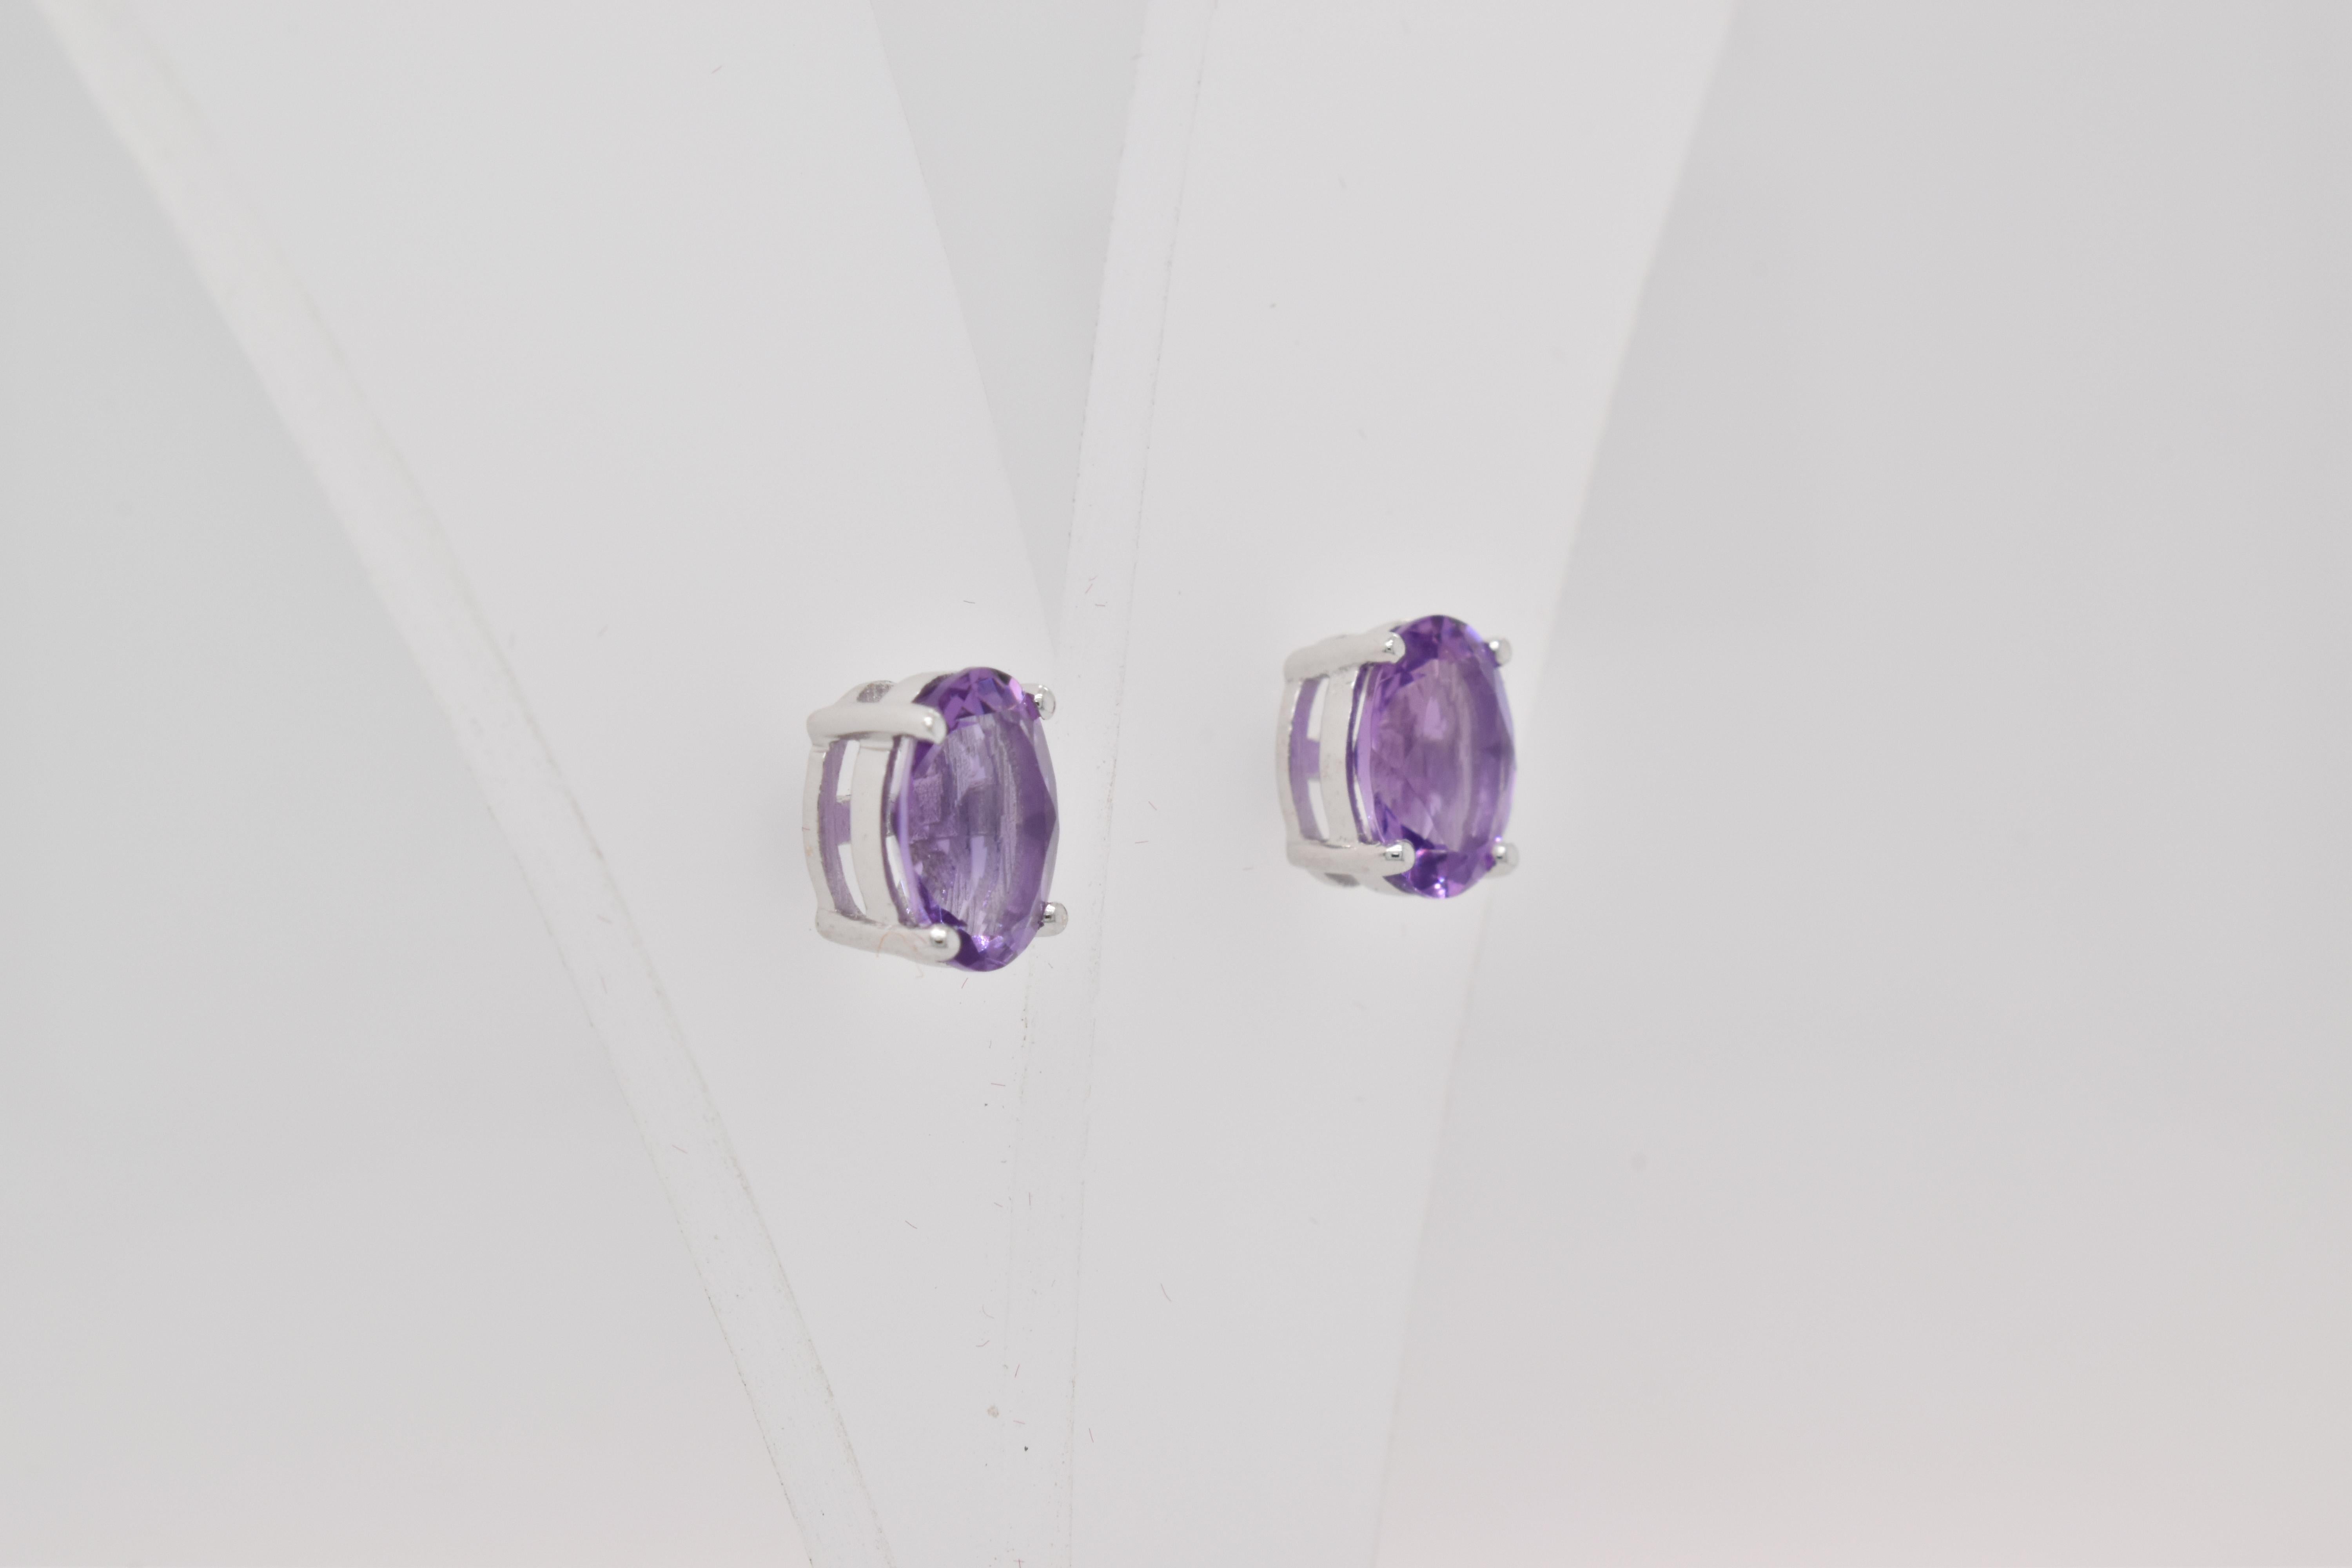 Oval Shape Amethyst Gemstone beautifully crafted in a Earrings. A fiery Violet Color February Birthstone. For a special occasion like Engagement or Proposal or may be as a gift for a special person.

Primary Stone Size - 8x6mm